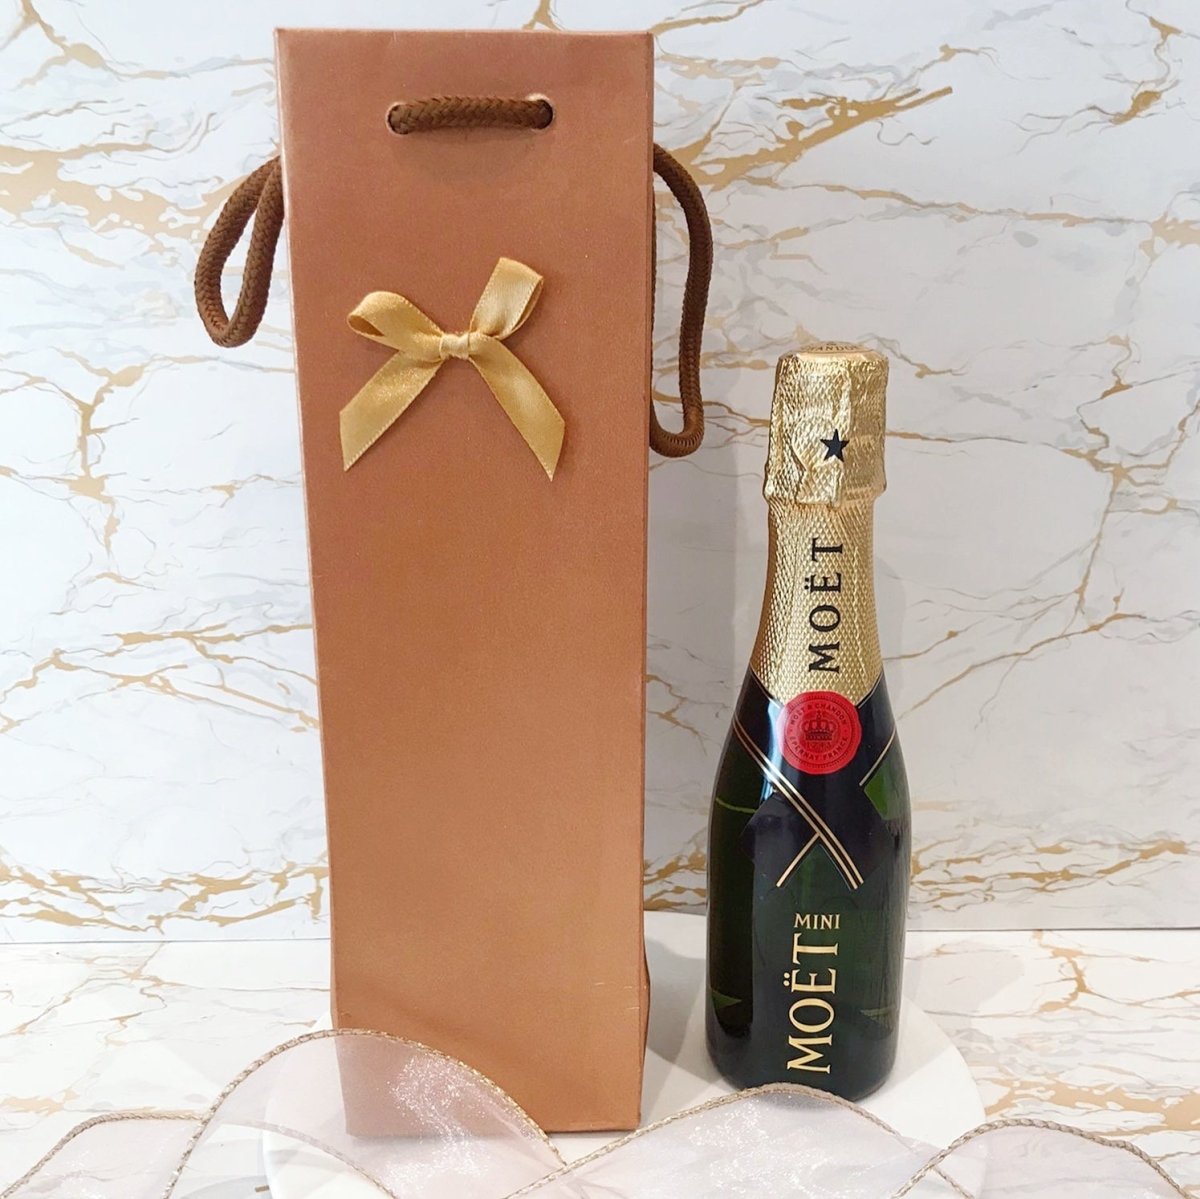 Moet Chandon Imperial Brut Champagne Mini – Bliss in a Bottle